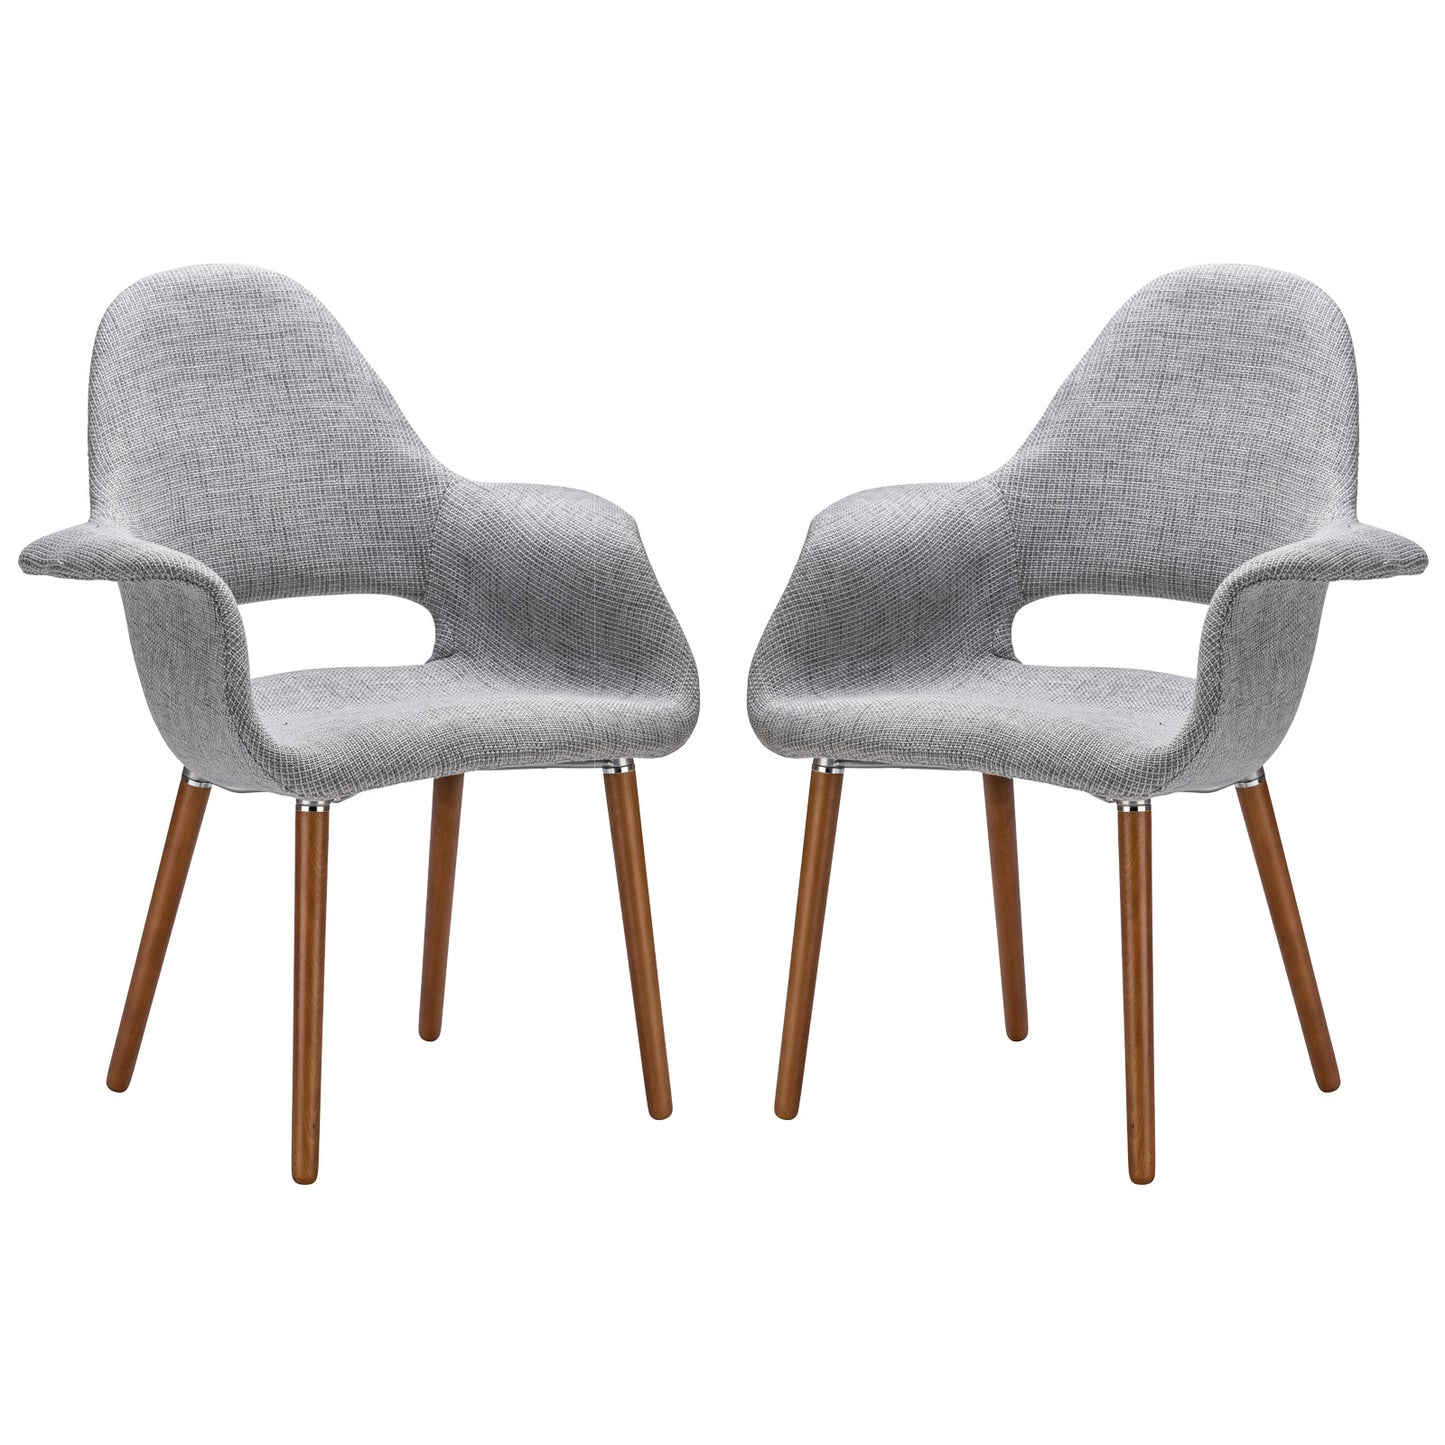 EdgeMod Barclay Dining Chair - Set Of 2